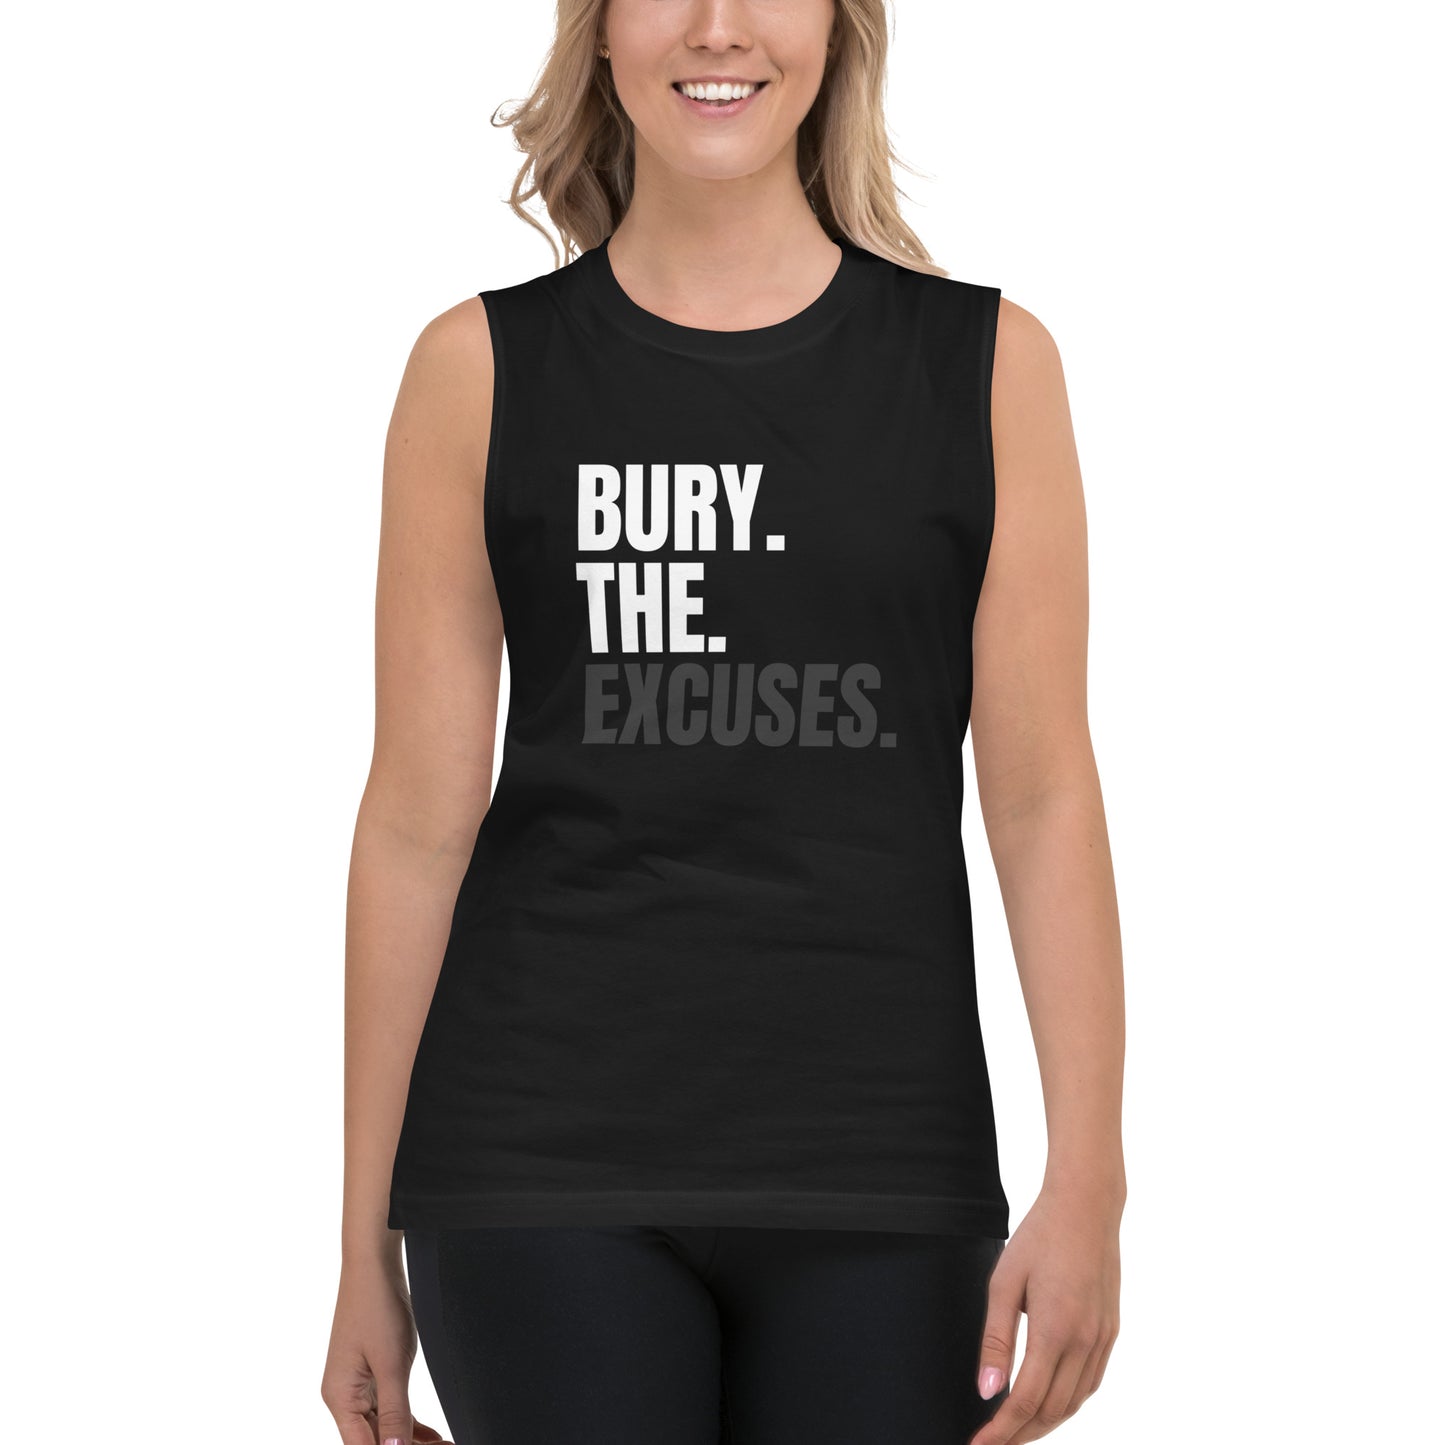 Bury the Excuses Unisex Muscle Tee for workout motivation